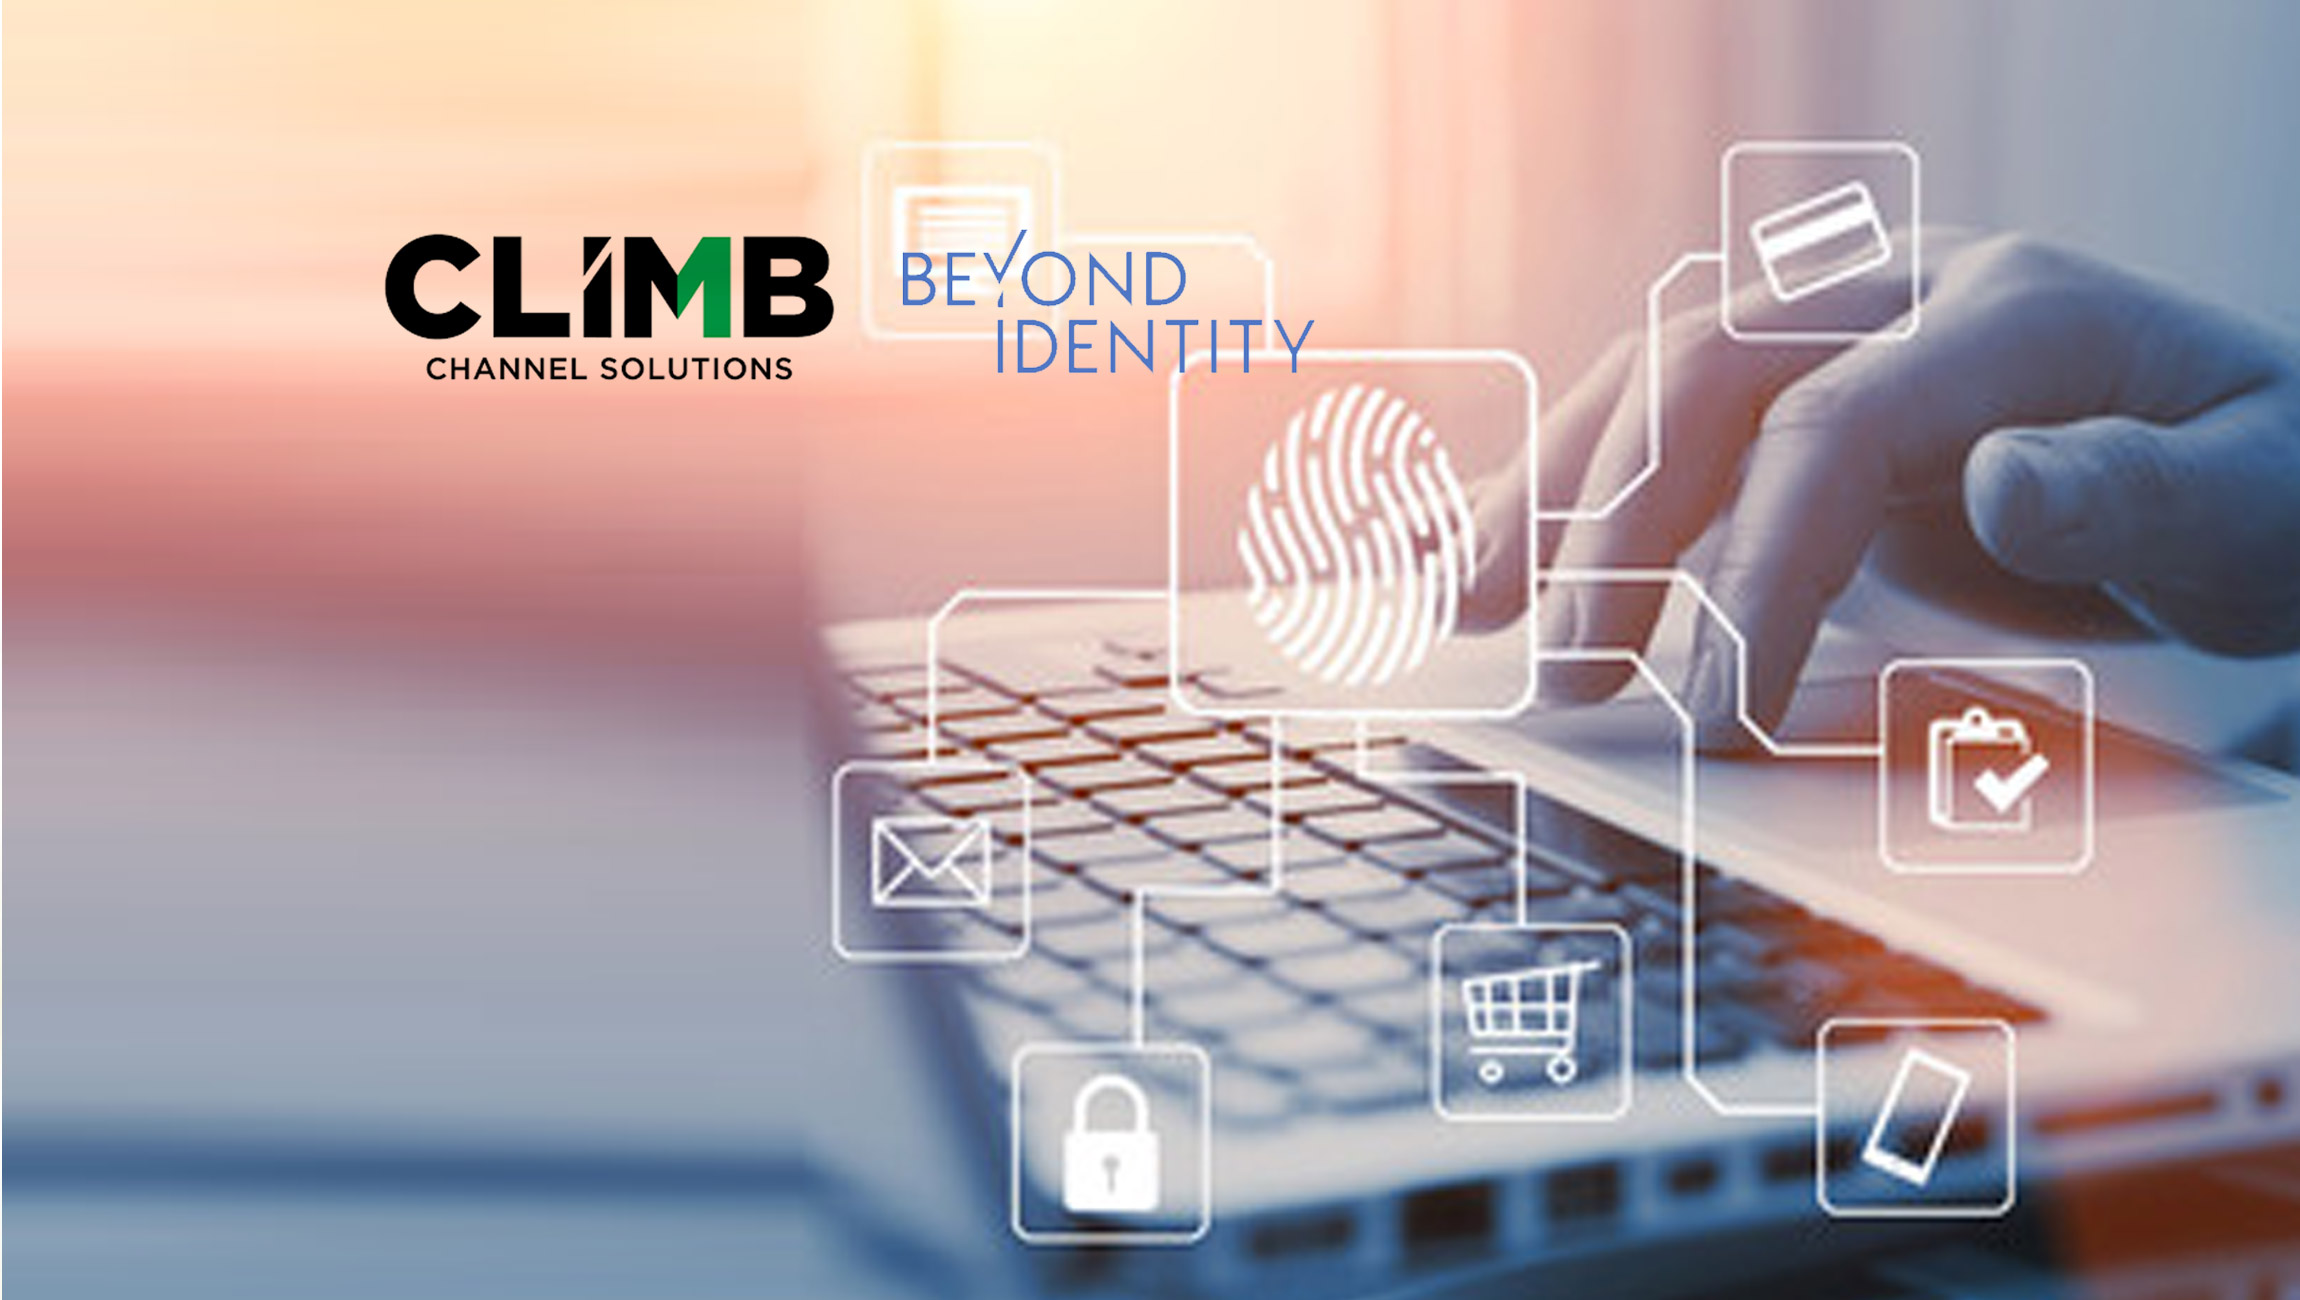 Climb Channel Solutions Partners with Beyond Identity to Bring Passwordless Multi-Factor Authentication Solution to Market